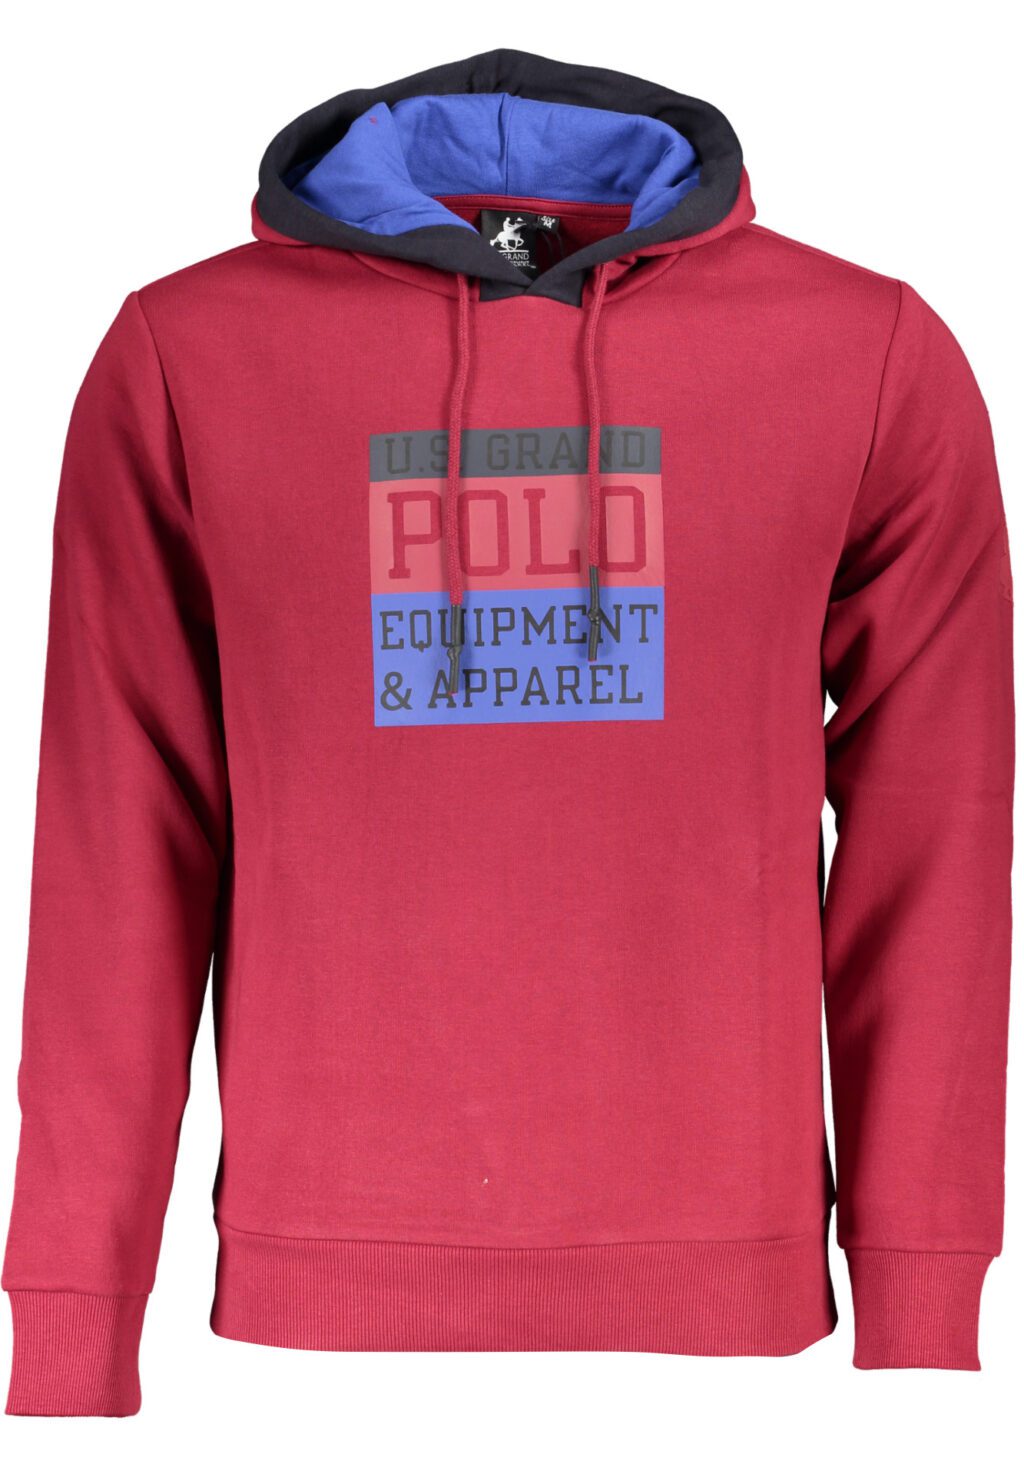 US GRAND POLO MEN'S RED ZIP-OUT SWEATSHIRT USF901_ROROSSO